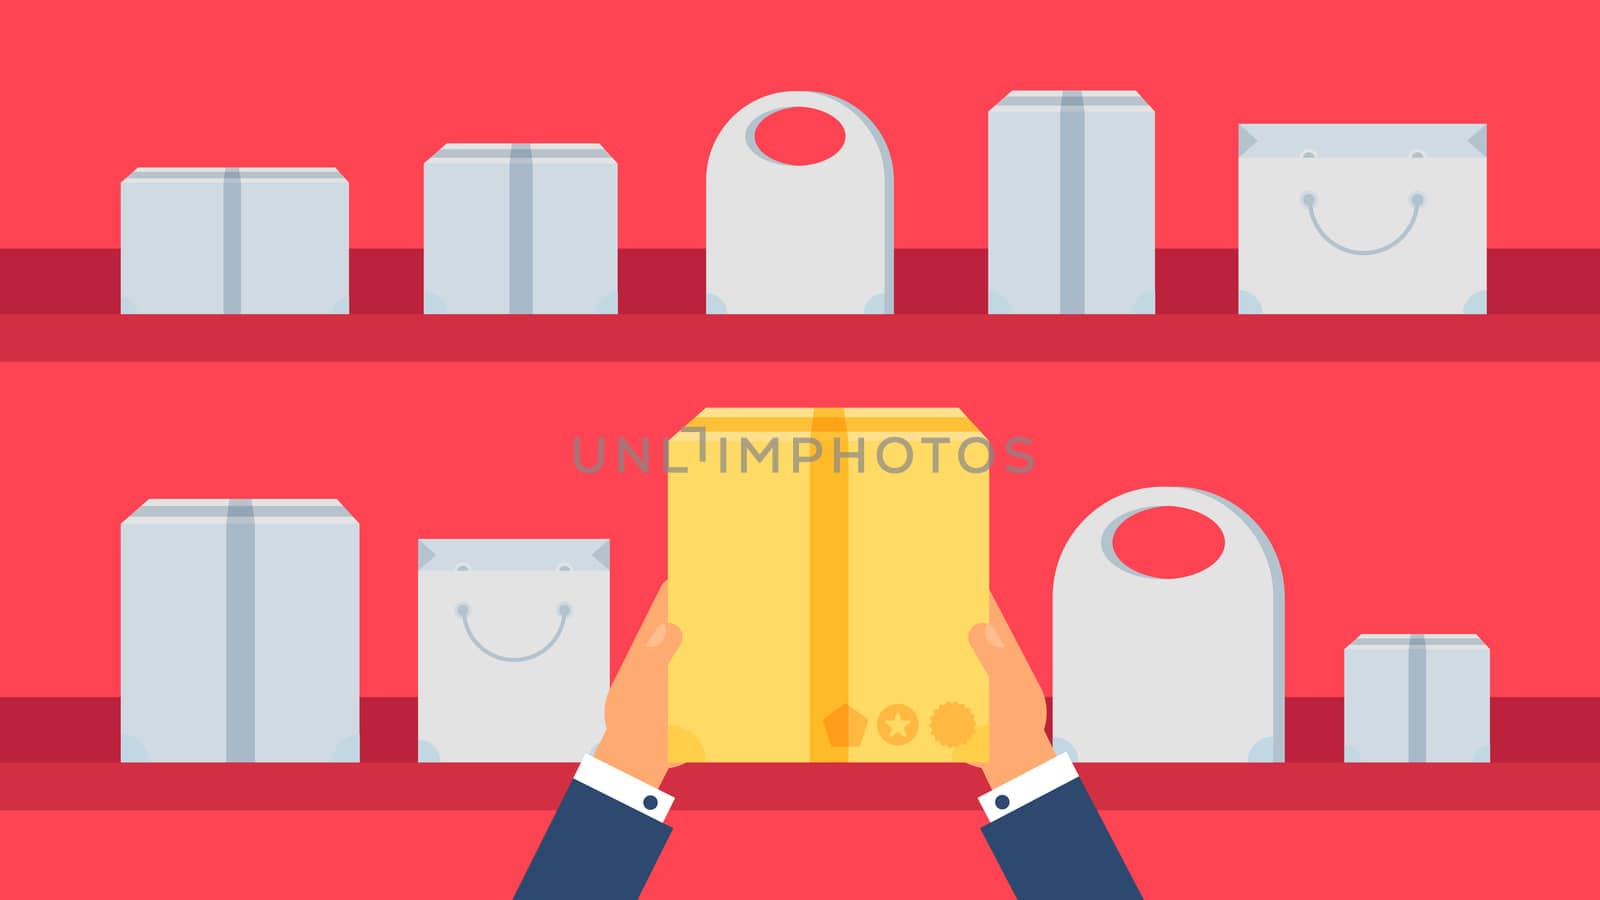 Shop Concept from Shopping Bags, Boxes and Packages with products. Sale Banner. Shelves store with offer for print, flyer, sticker, poster. Vector